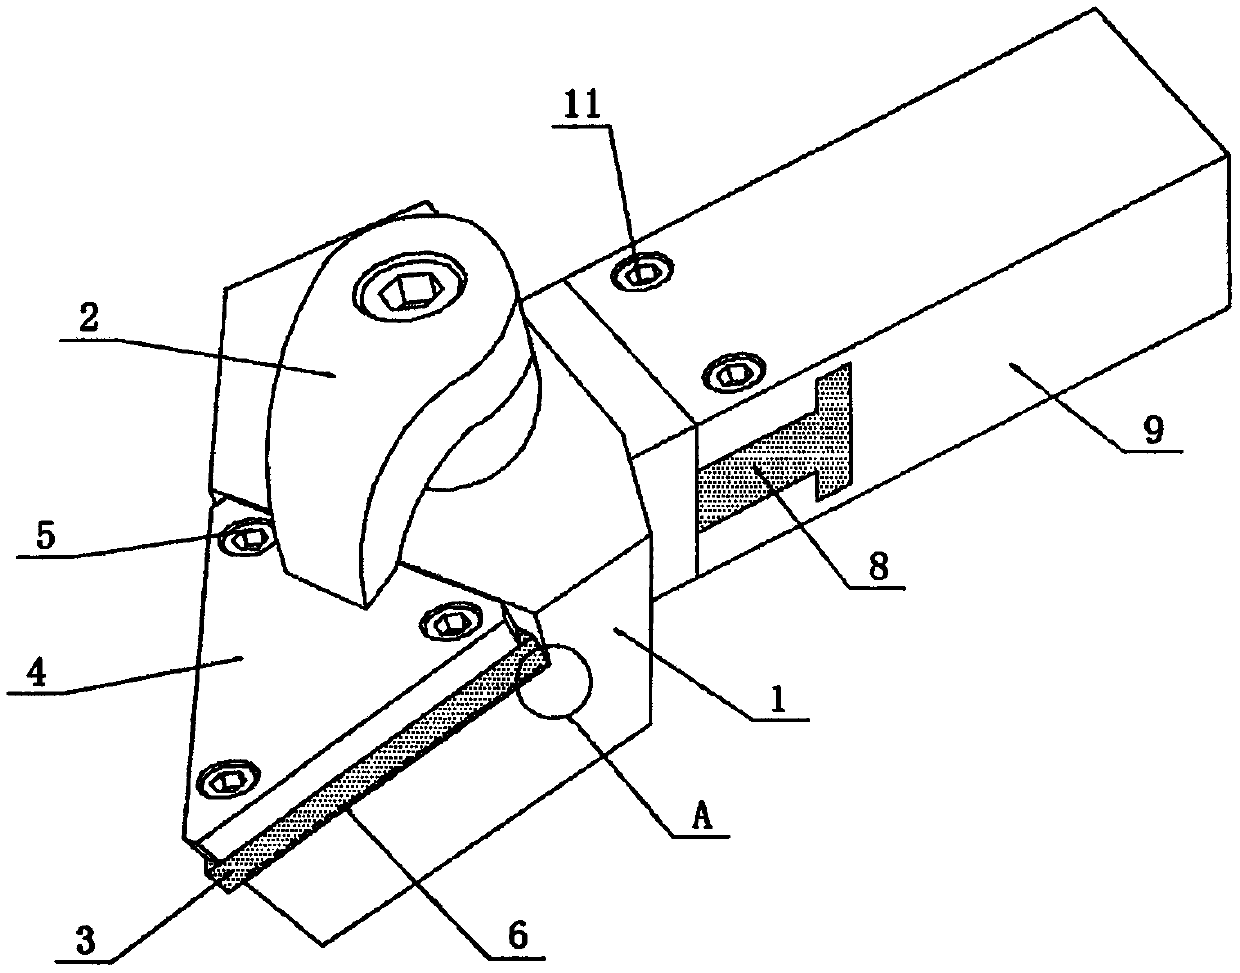 Dedicated PCD composite tool of gear shifting cover